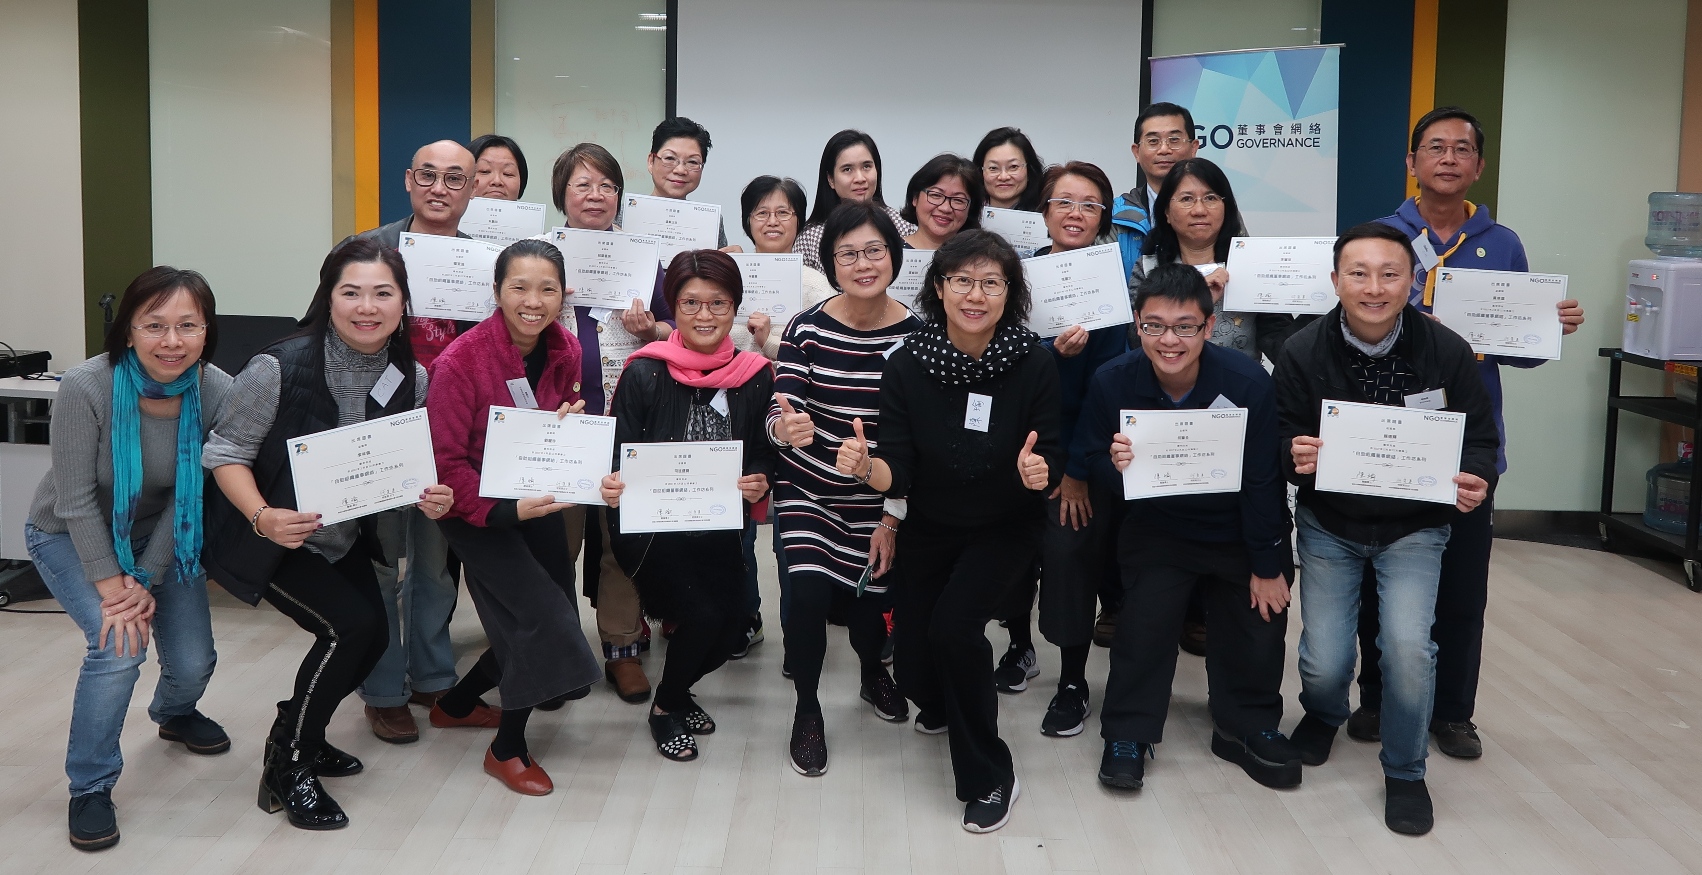 Directors of Self-help Organizations’ Network I held between February to December 2017 has been completed. The Network comprised of six networking cum training sessions provides a platform for solution-focused sharing and networking on governance issues, encouraging the co-creation of governance practices by board members of local rehabilitation self-help organizations.